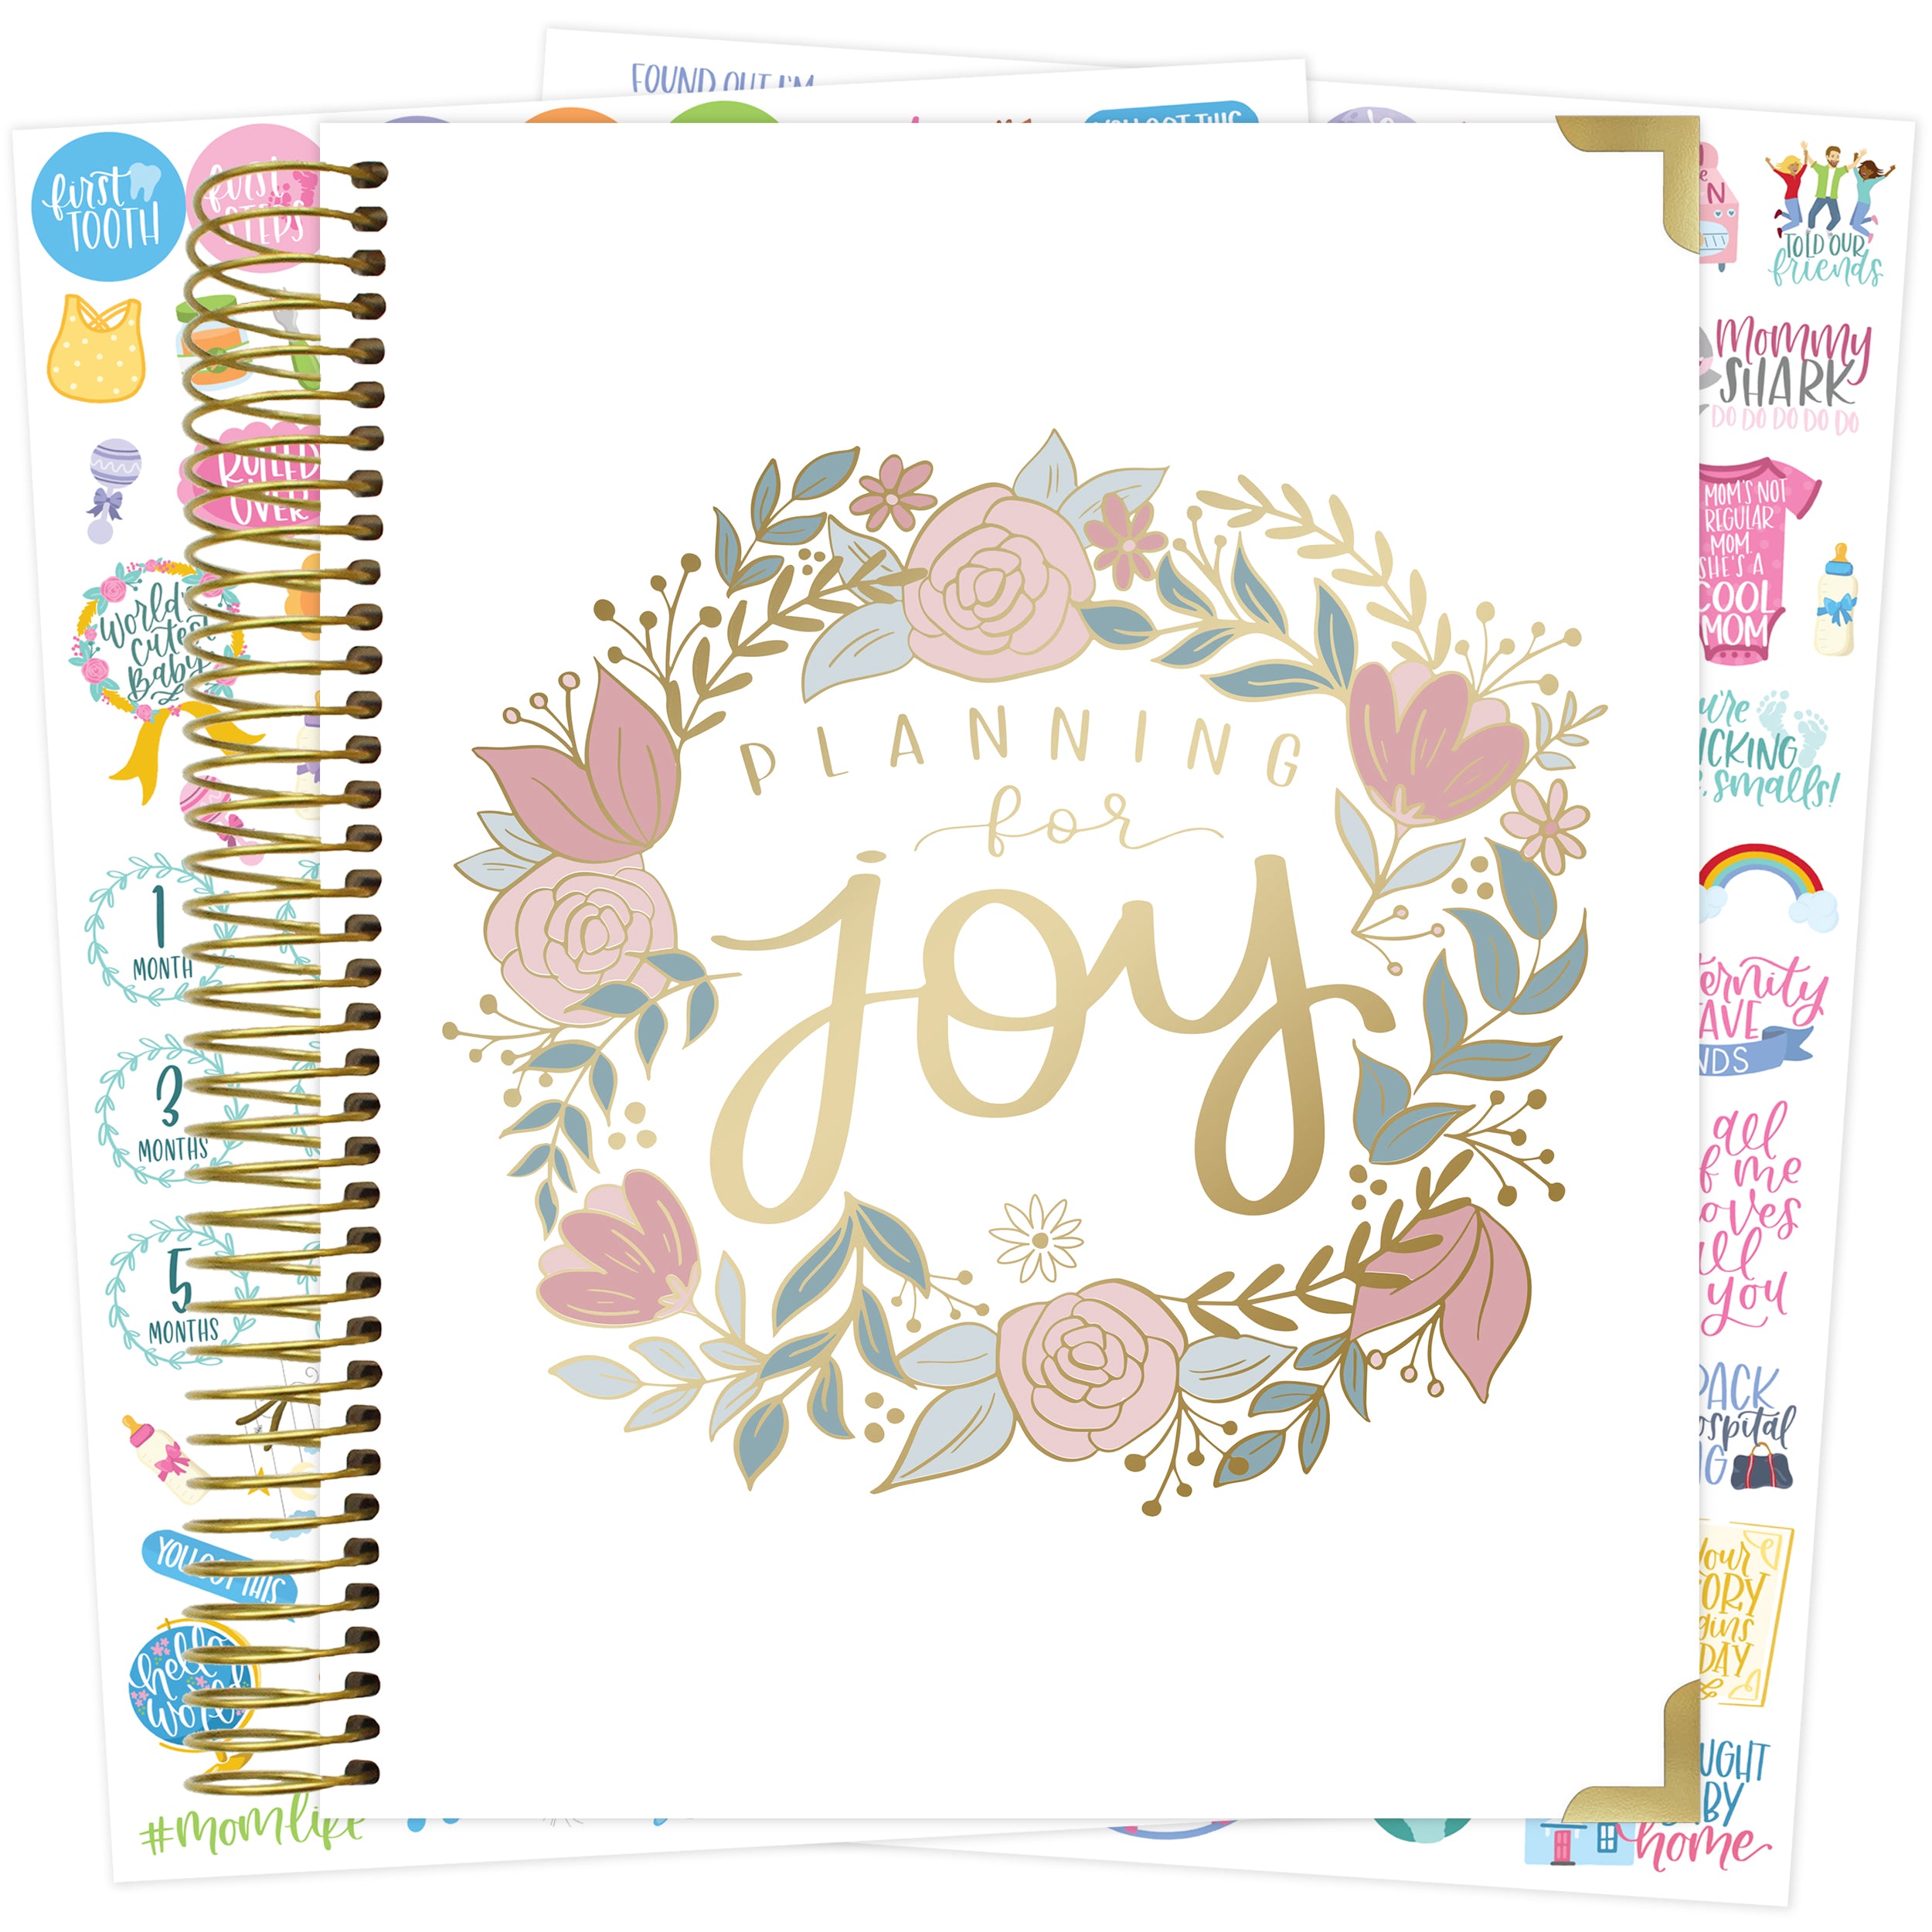 Scrapbooking etc. bloom daily planners New Pregnancy & Baby's First Year Planner Sticker Pack Maternity/Newborn Themed Stickers for Decorating Planning 8 Sheets / 580+ Stickers 